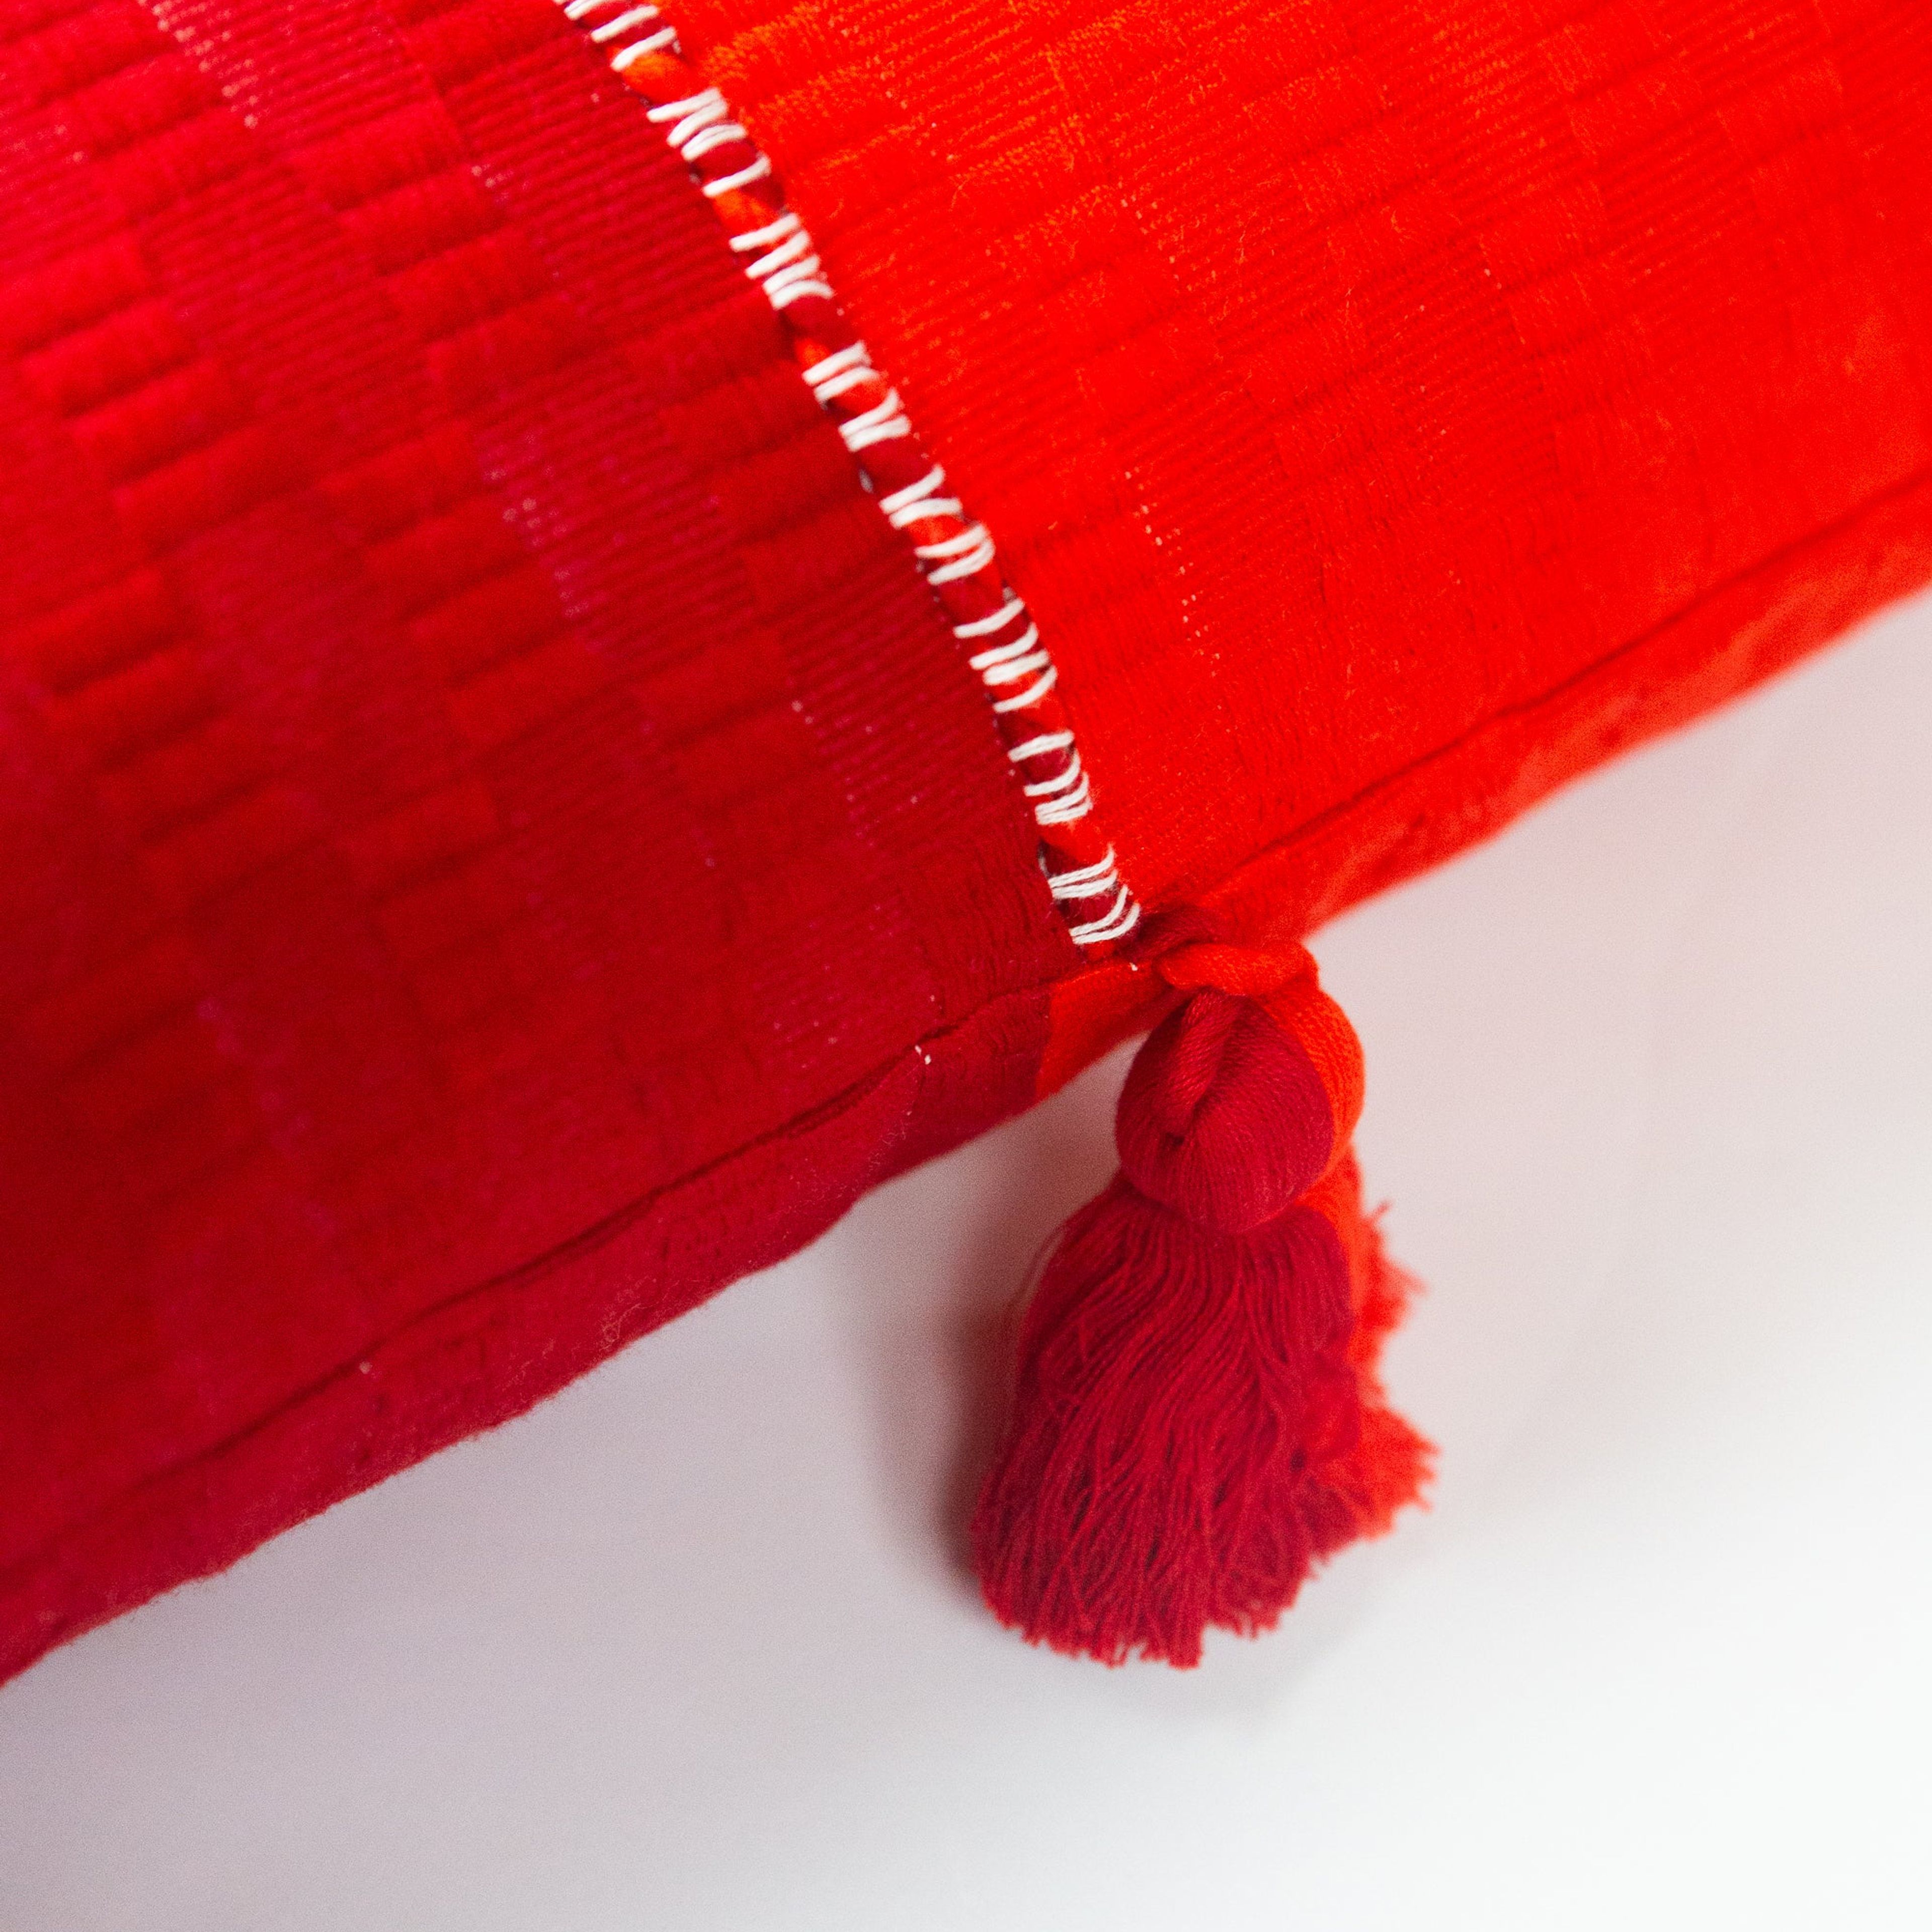 Antigua Pillow - Red Colorblocked